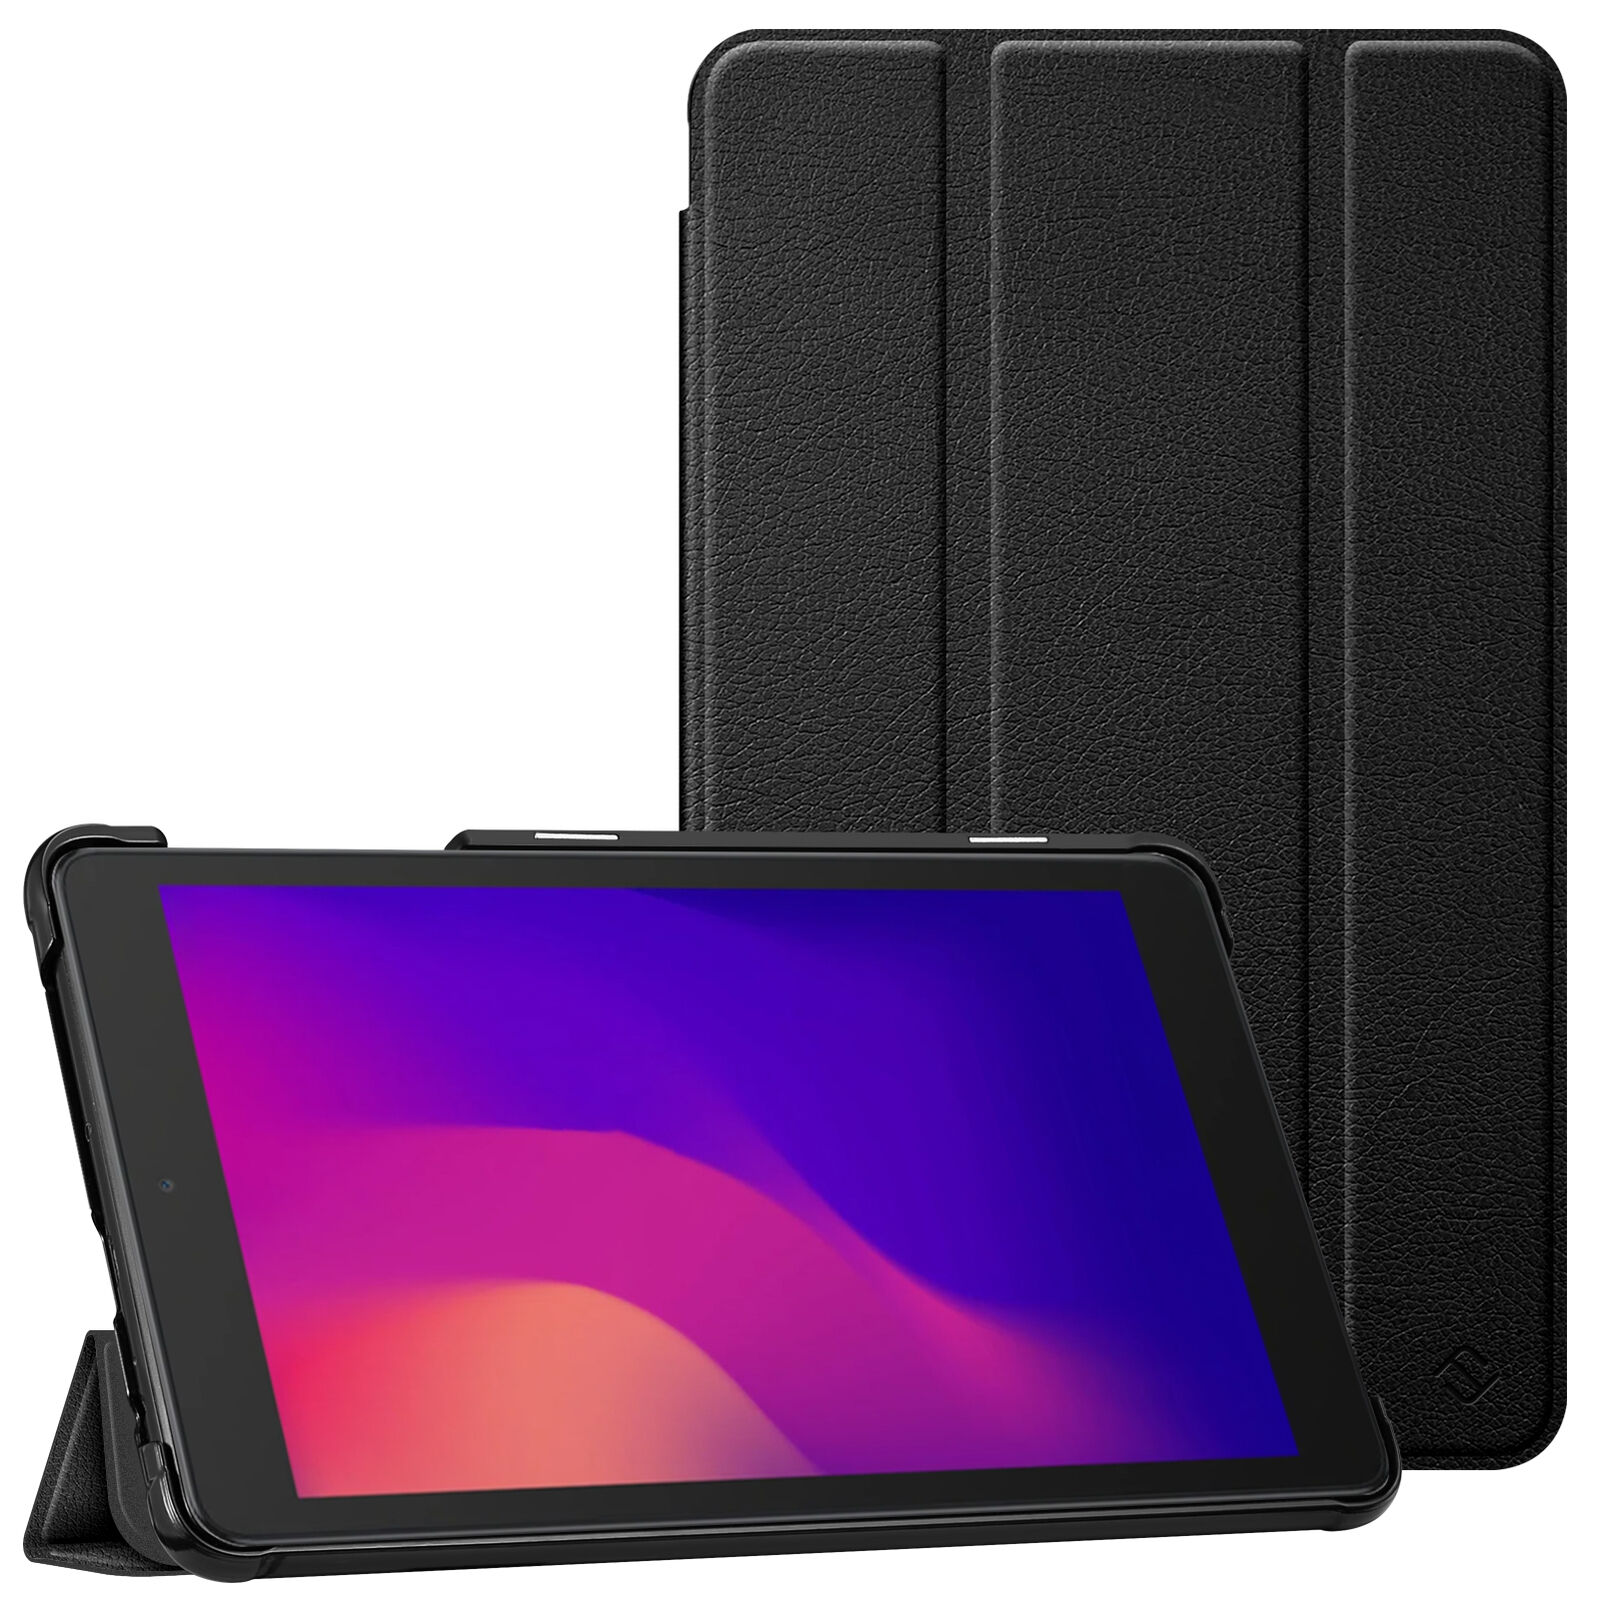 Folio Case For Verizon TCL Tab 8.0 inch Tablet Protective Stand Smart Cover